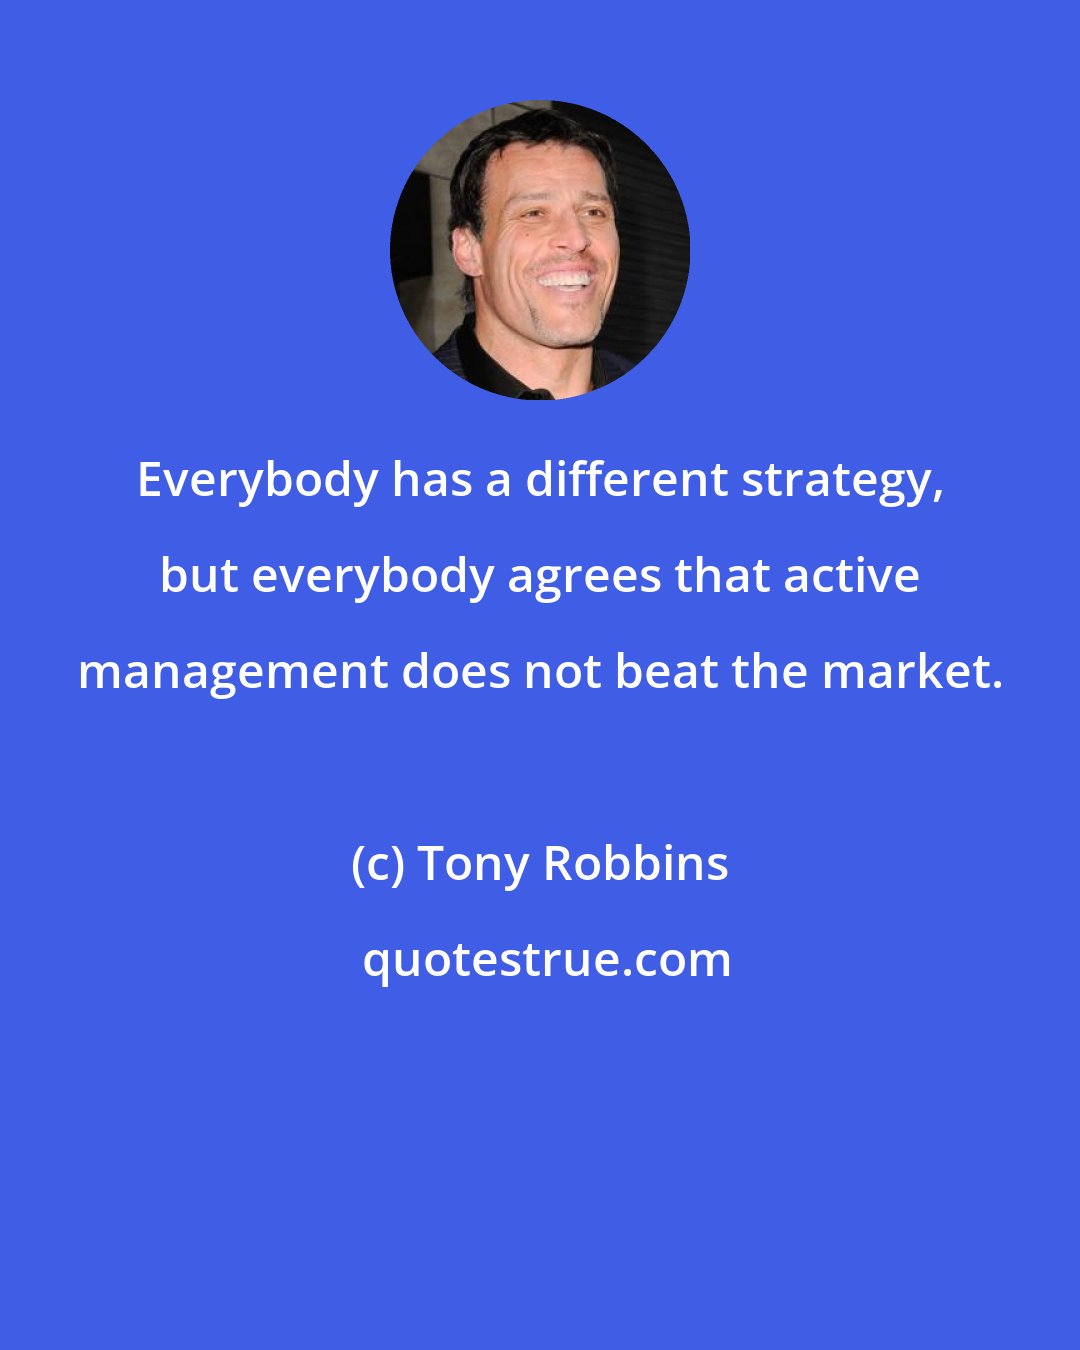 Tony Robbins: Everybody has a different strategy, but everybody agrees that active management does not beat the market.